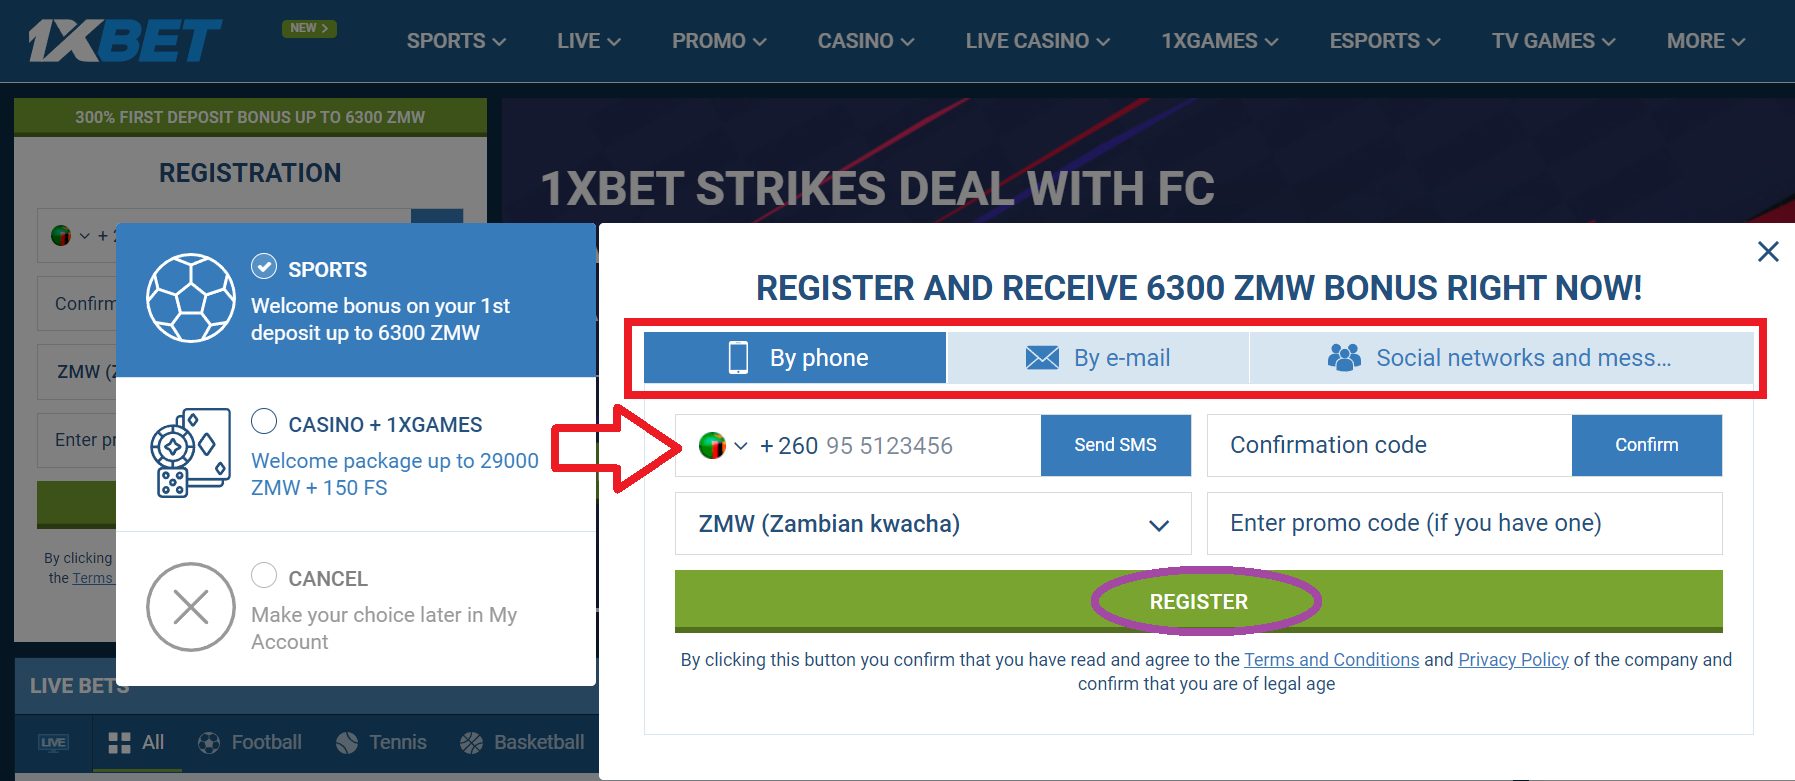 registration by phone number 1xBet